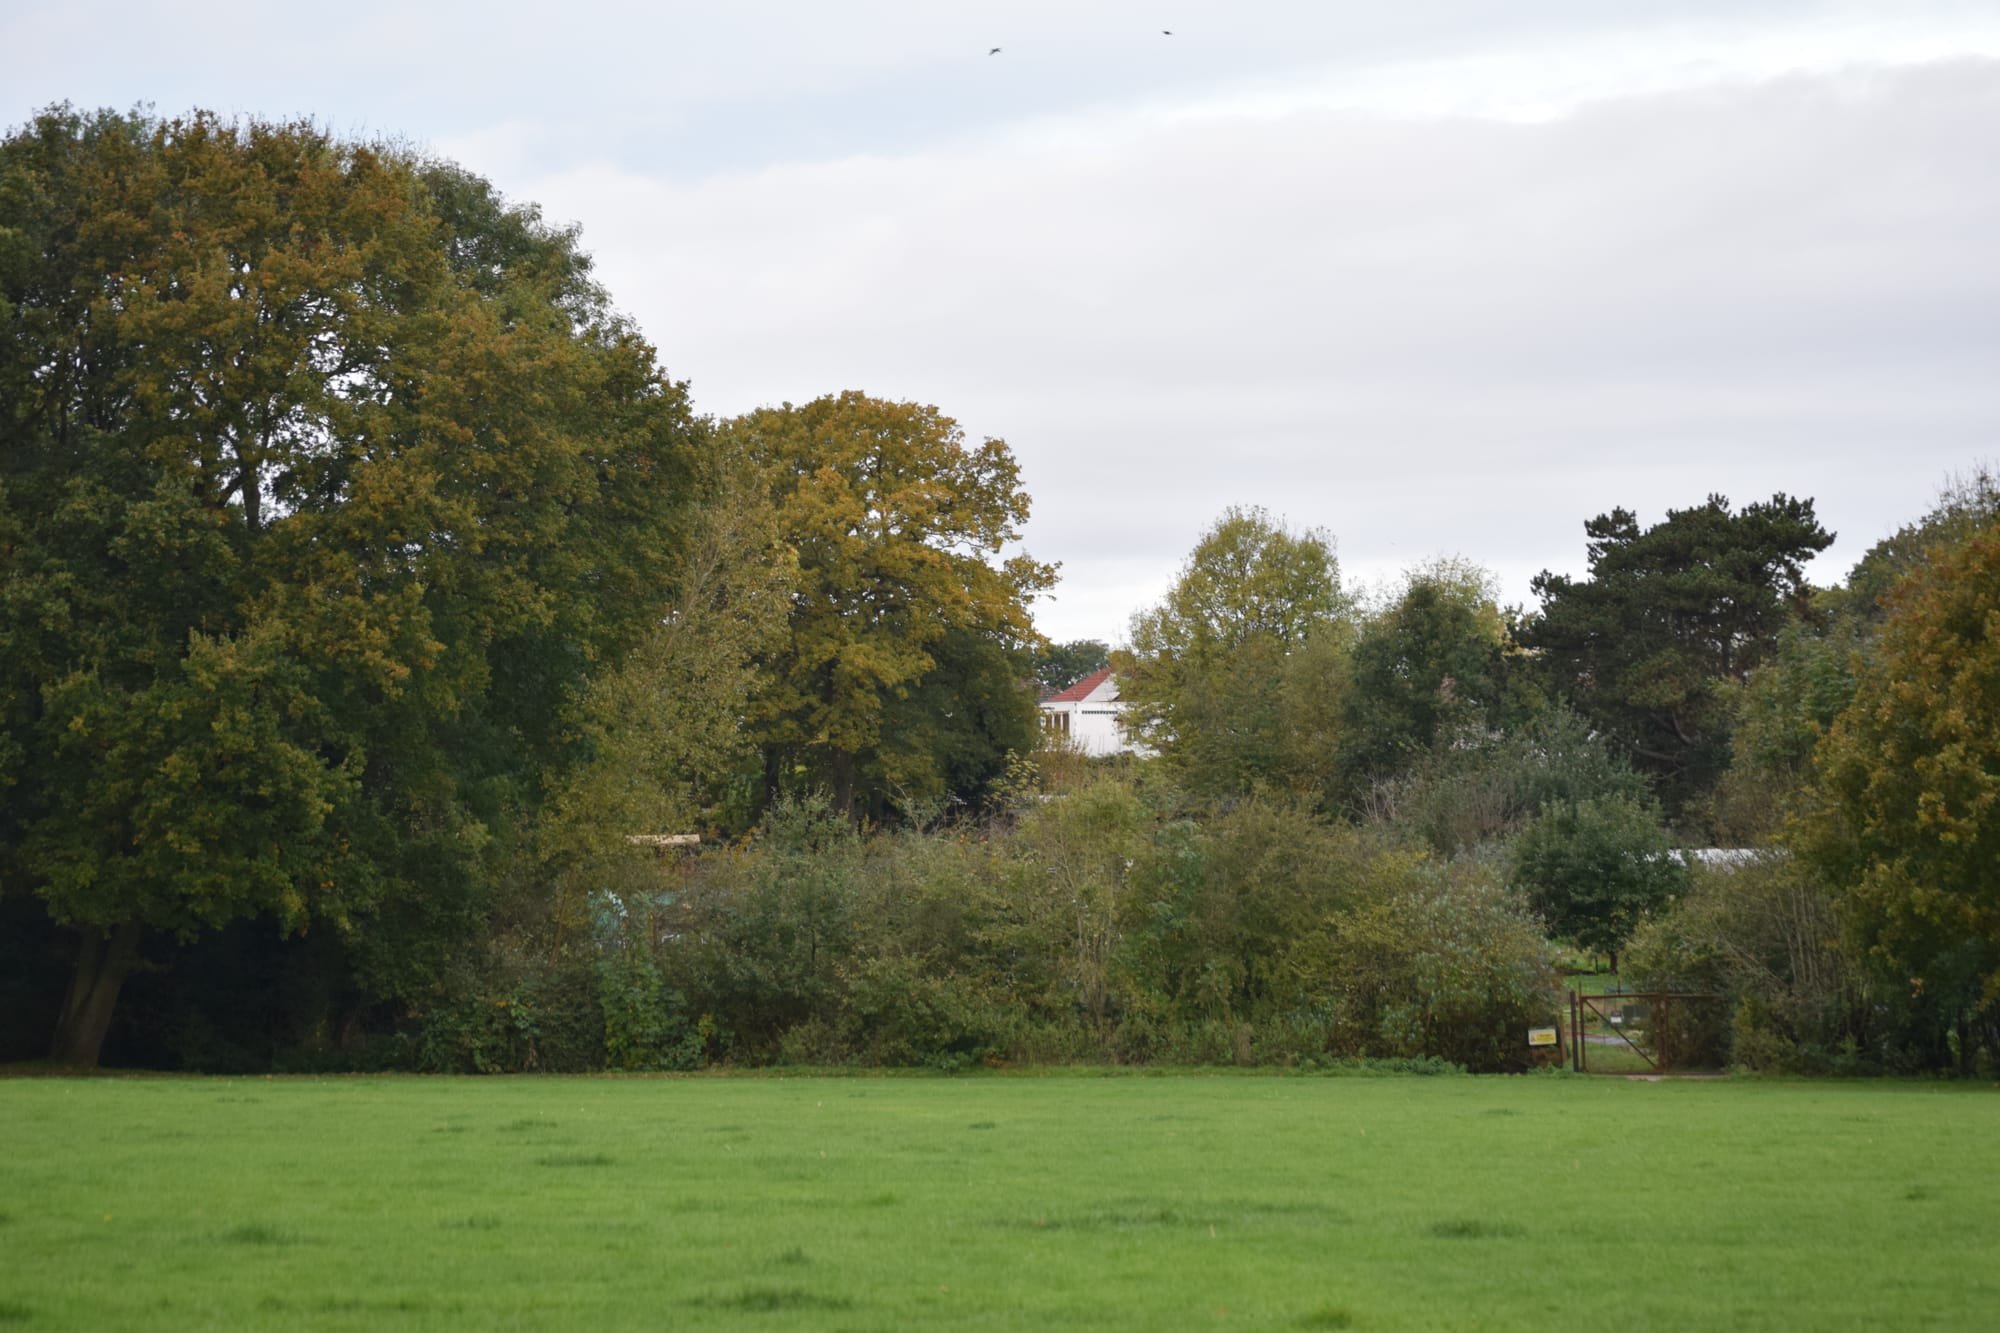 Playing fields are next to allotments